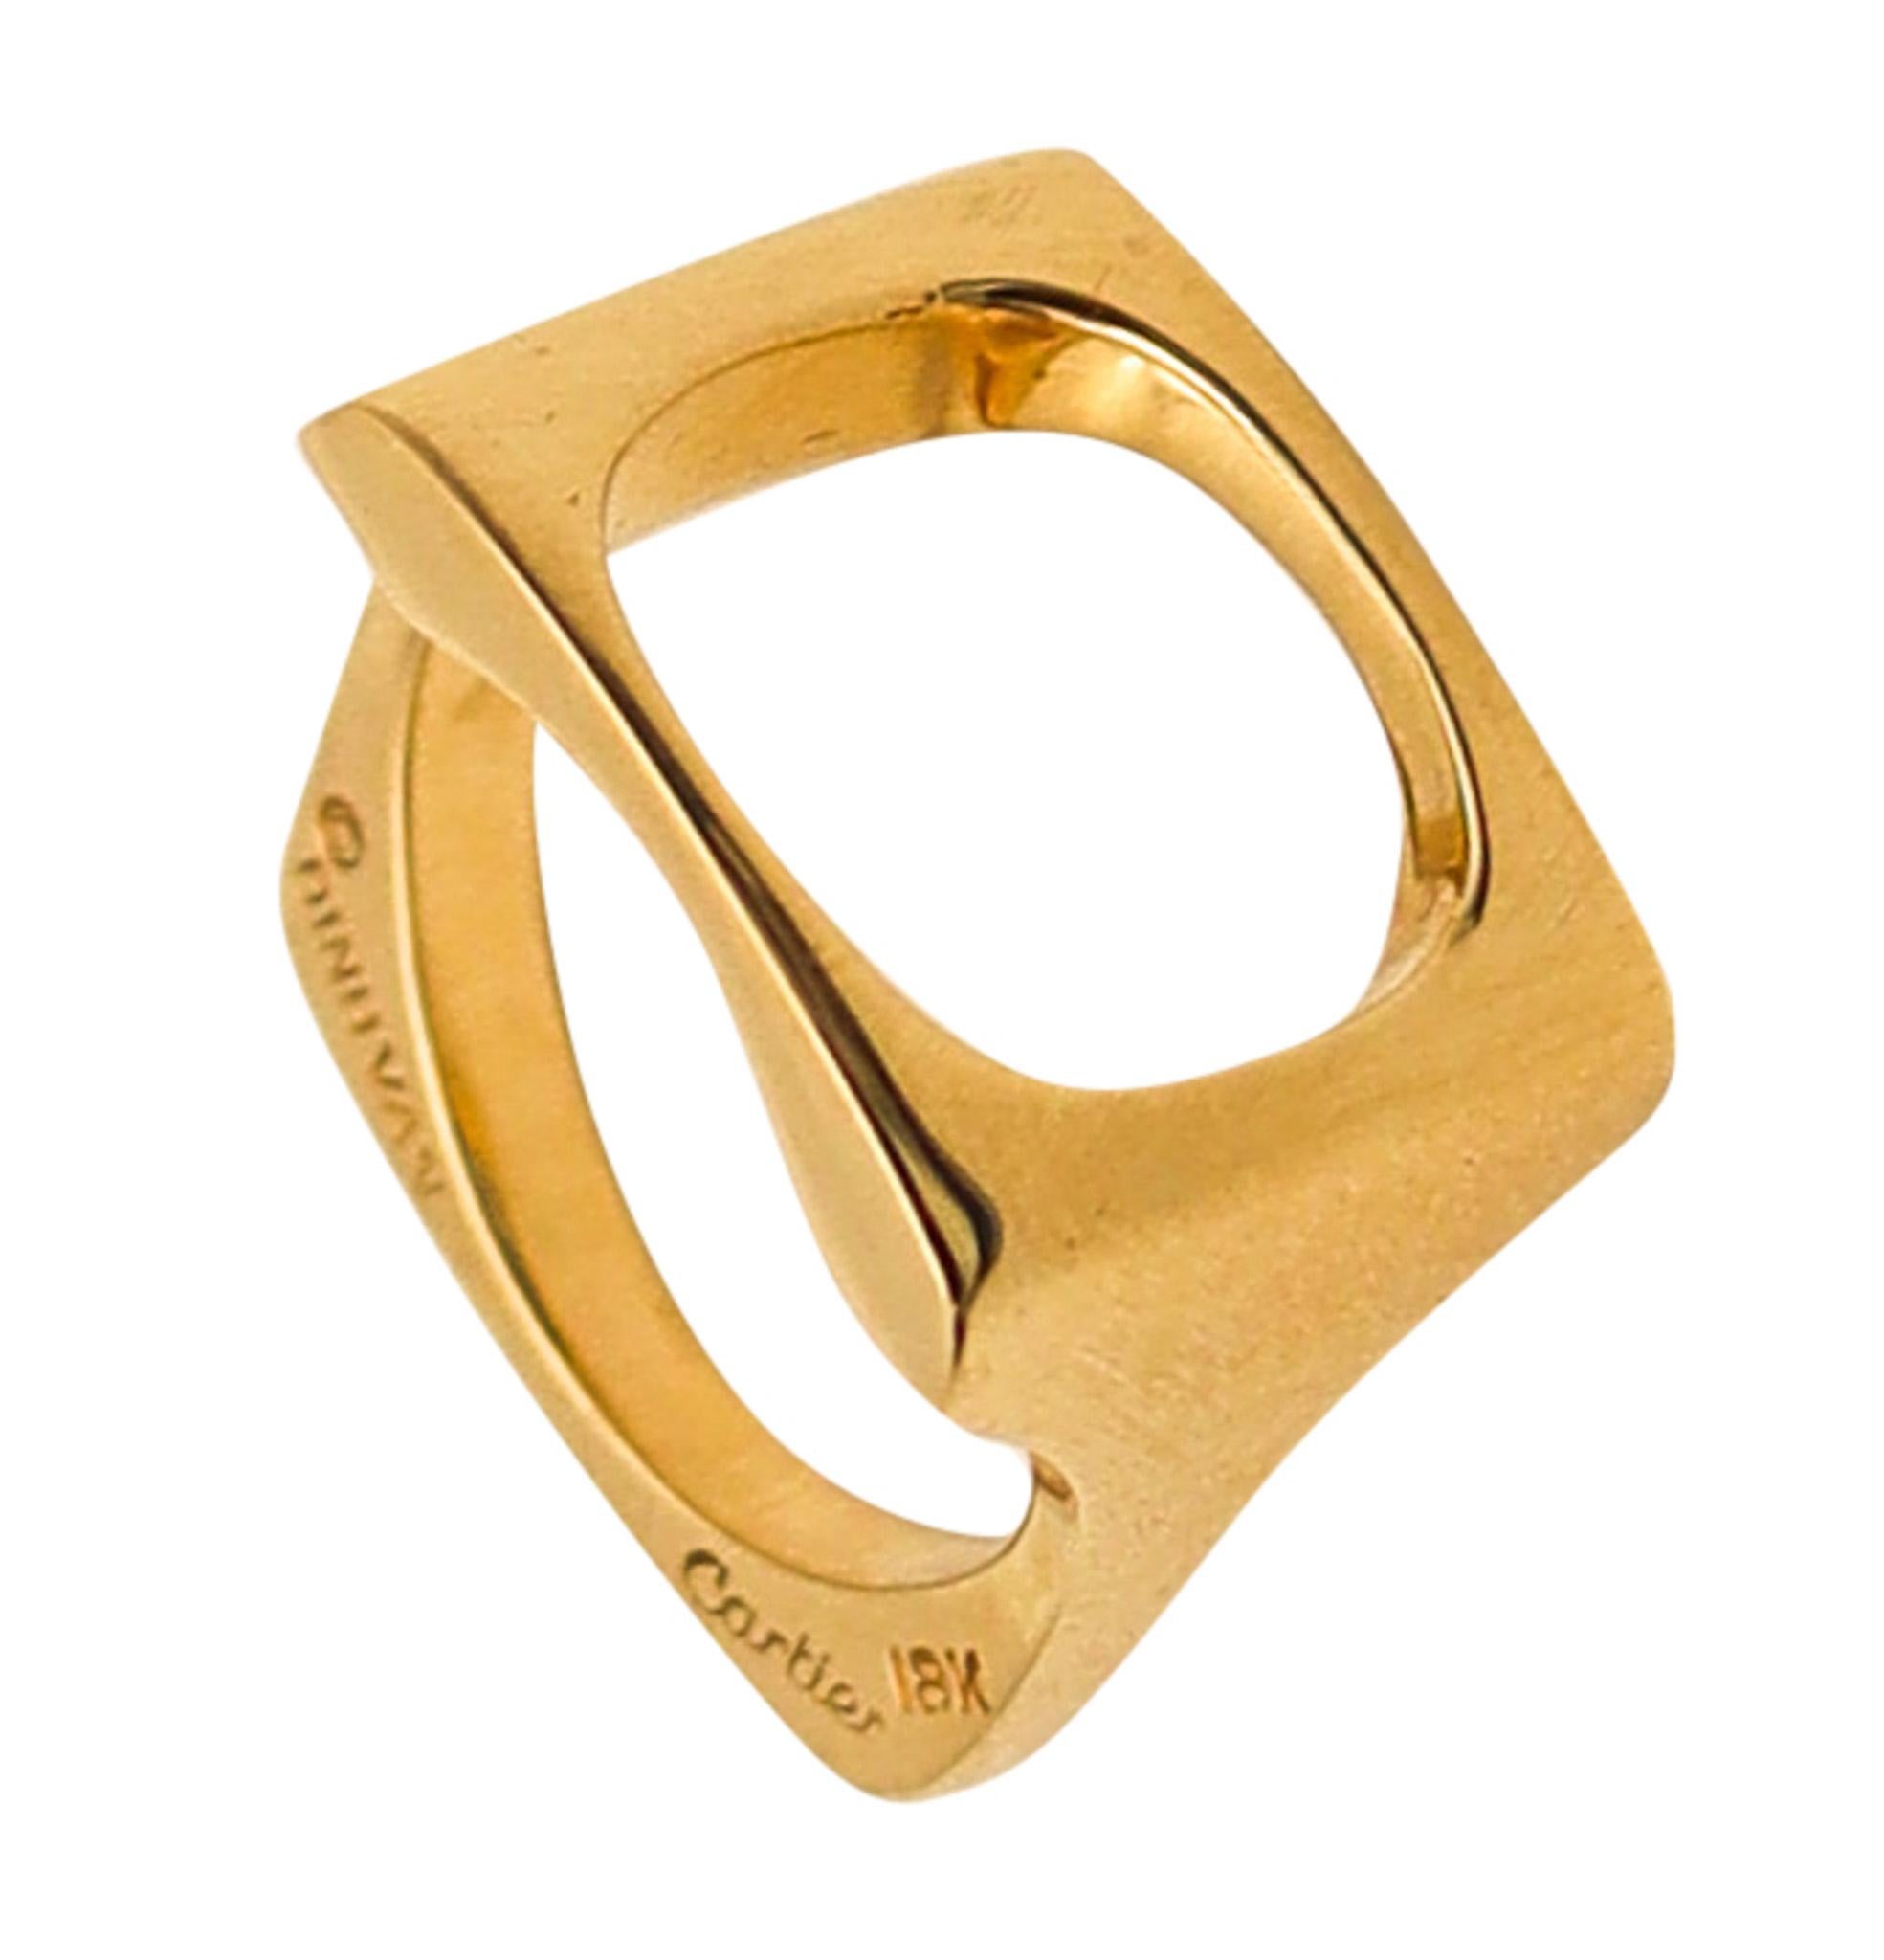 Cartier Paris 1970 By Dinh Van Sculptural Cushion Oval Ring In 18Kt Yellow Gold